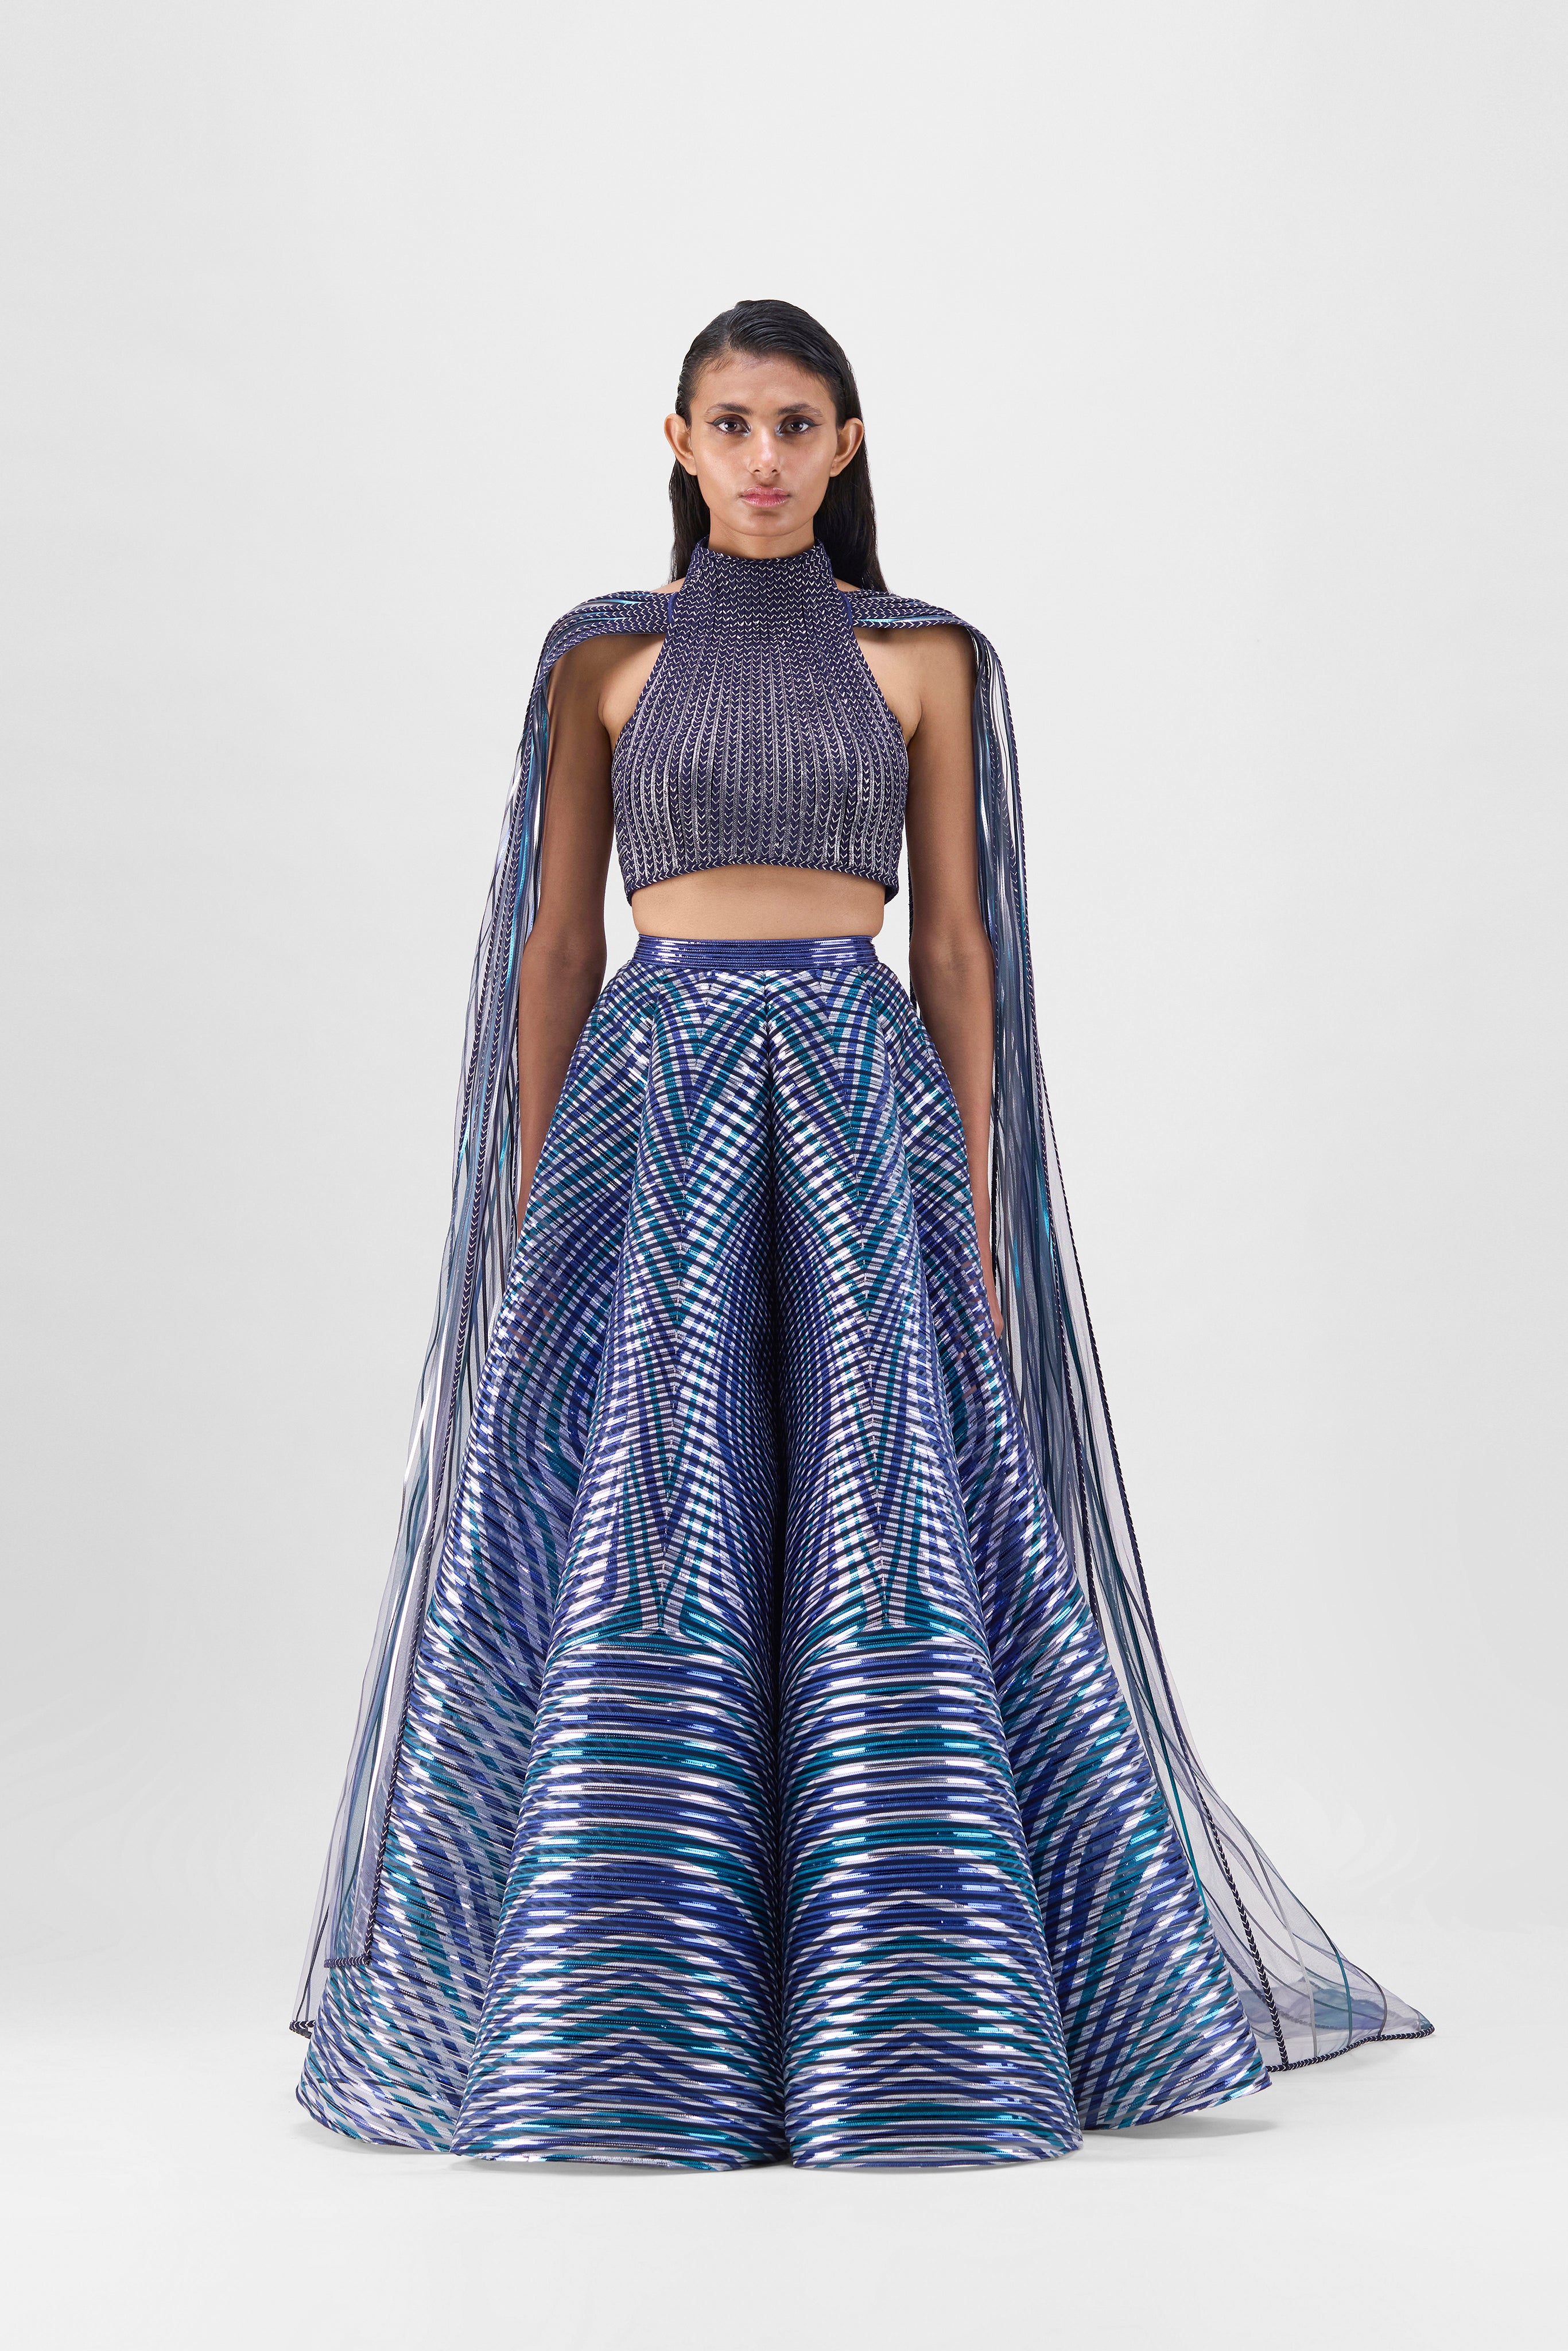 METALLIC BRAIDED HALTER TOP WITH A FLUTED TULLE PRINTED SKIRT